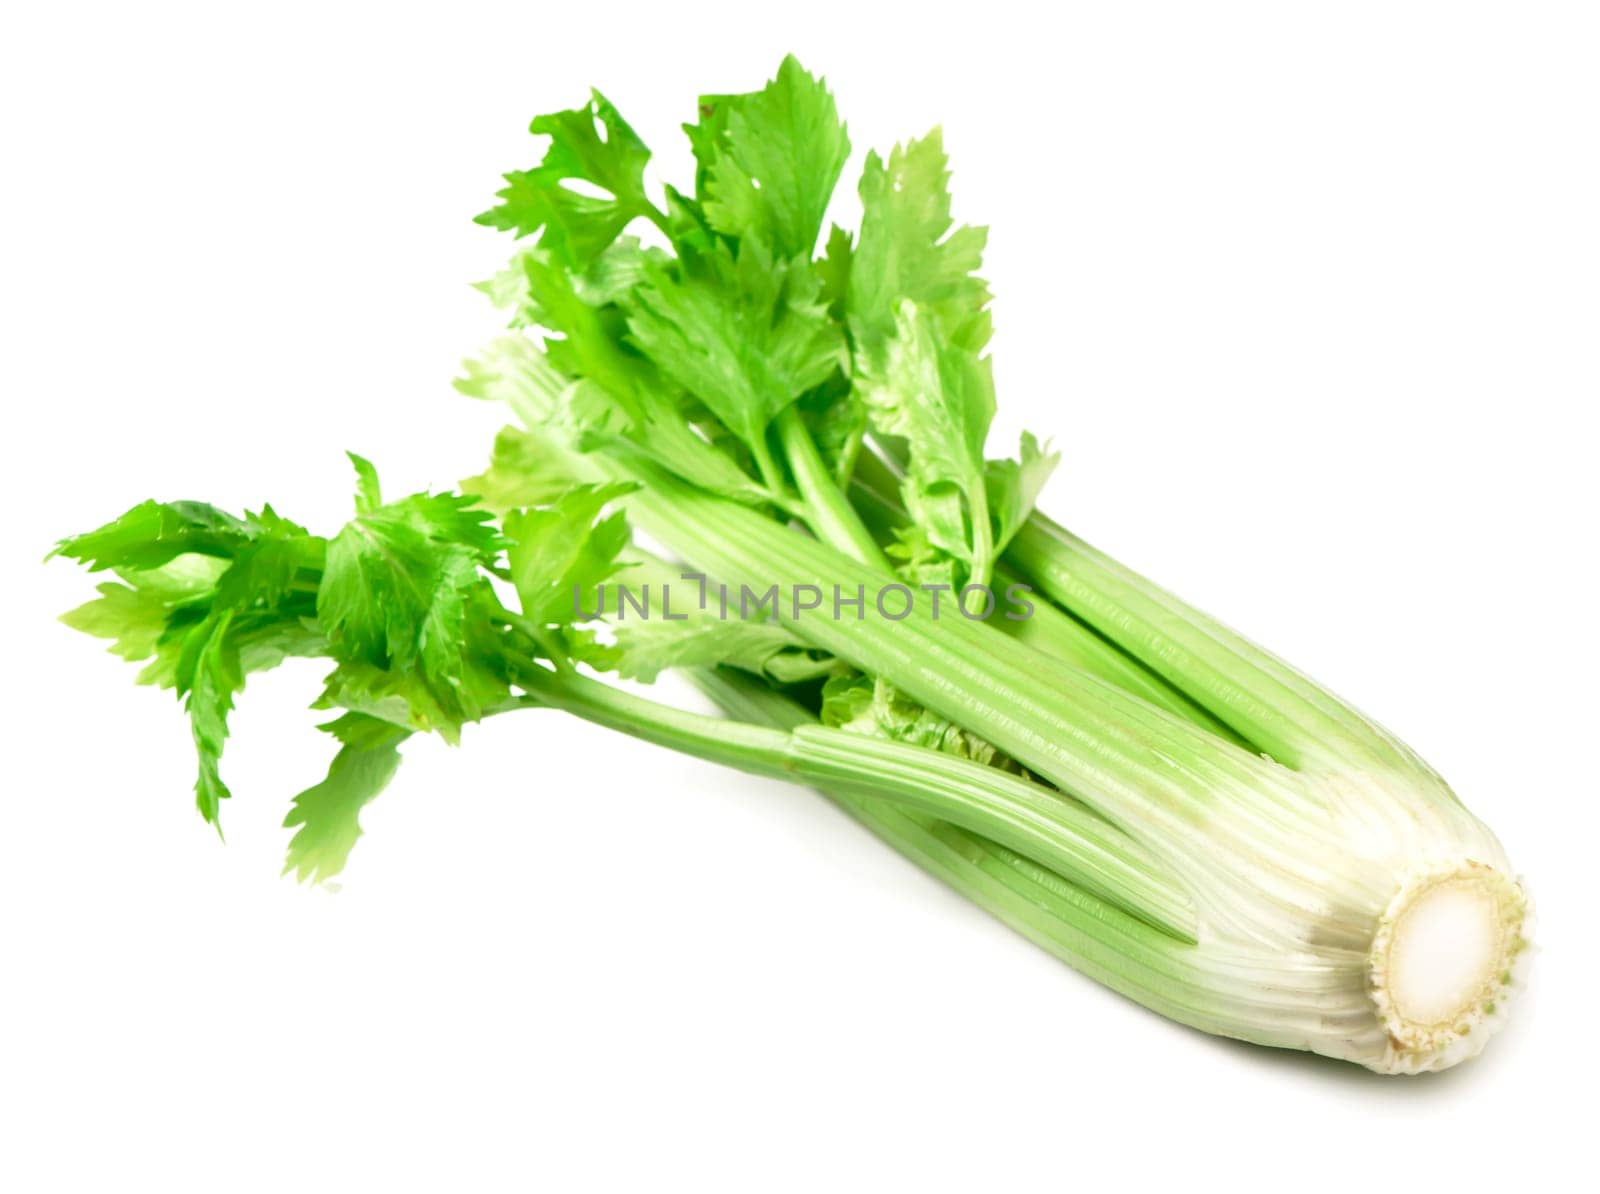 fresh leaves and stems of celery isolated on white background